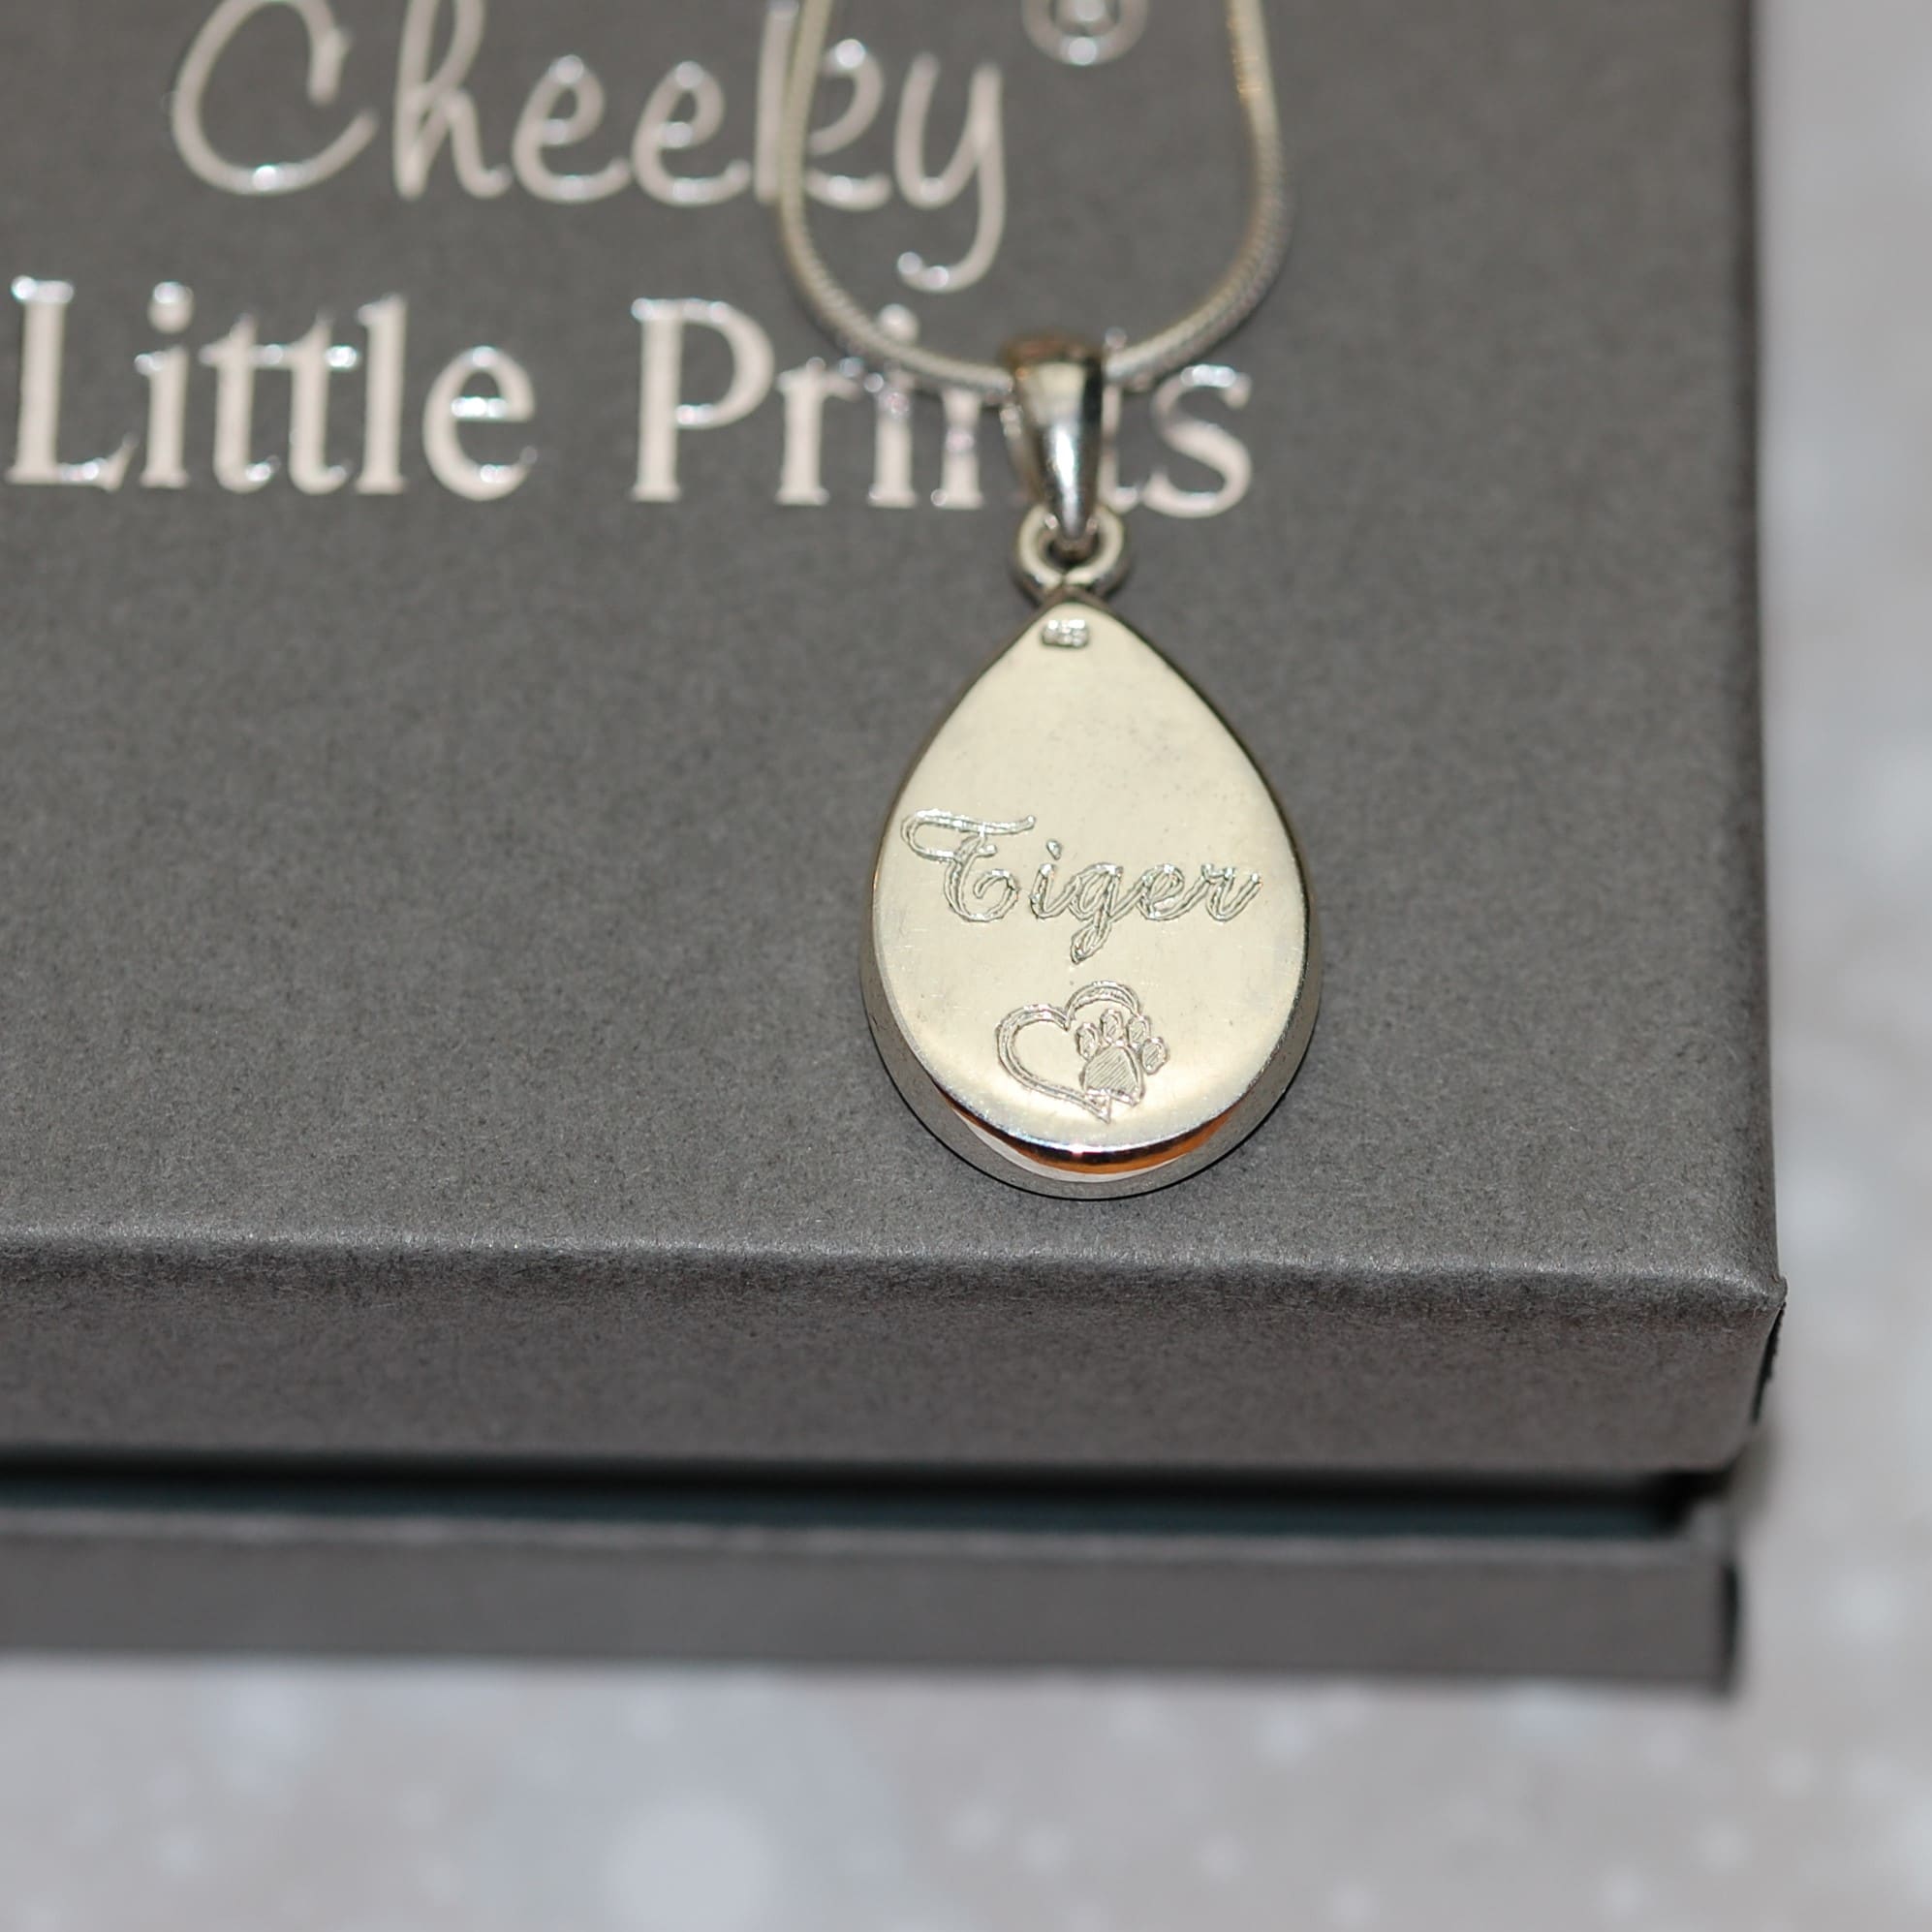 Pet name inscribed on the back of a silver tear drop pendant with pet fur or cremation ashes